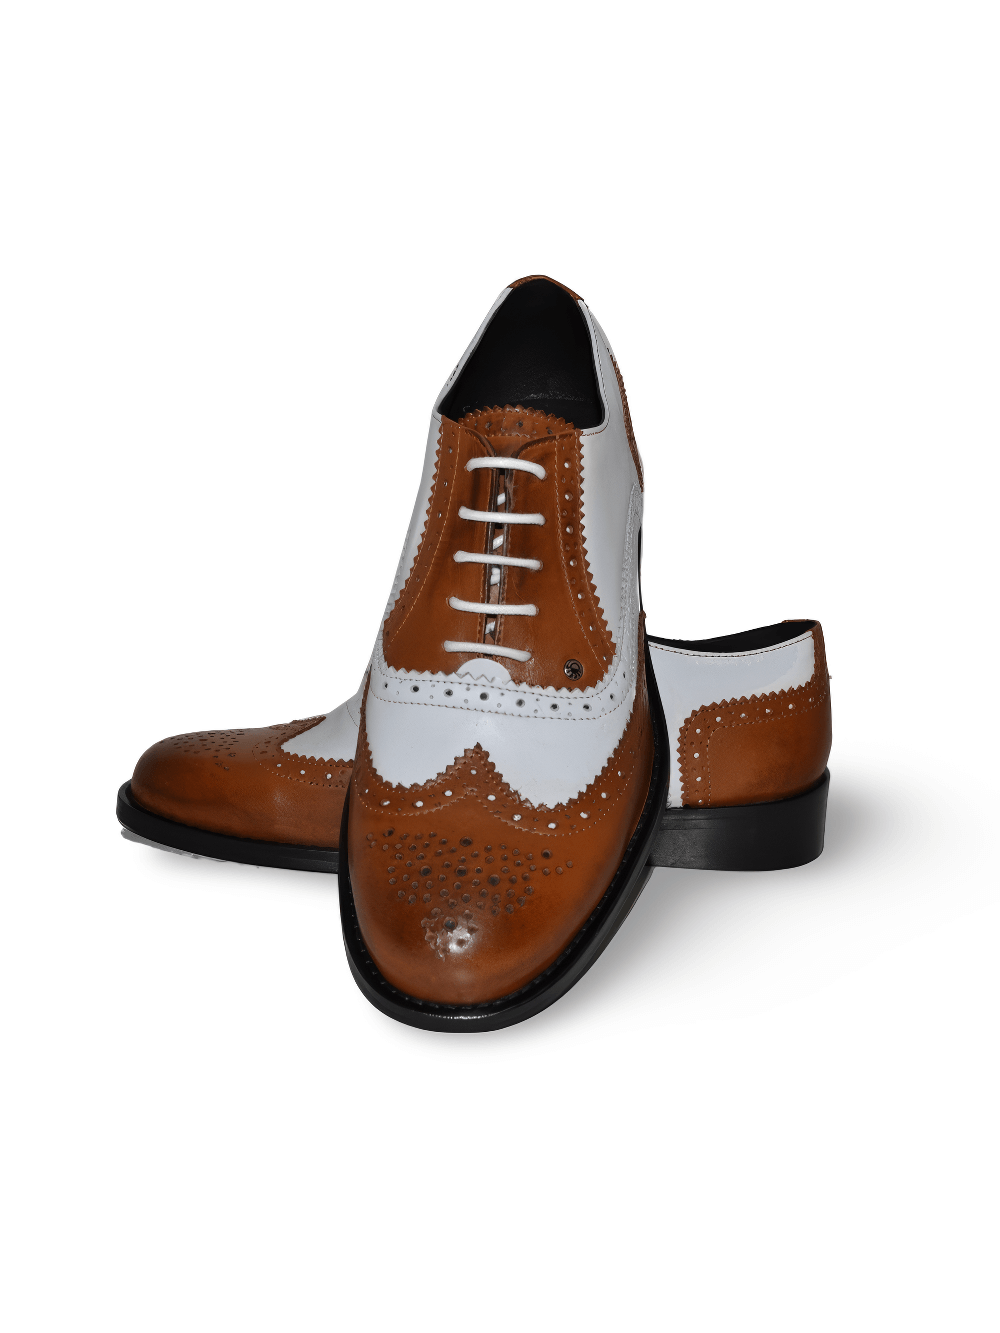 Stylish Brown Oxford Leather Lace-Up Shoes for Men